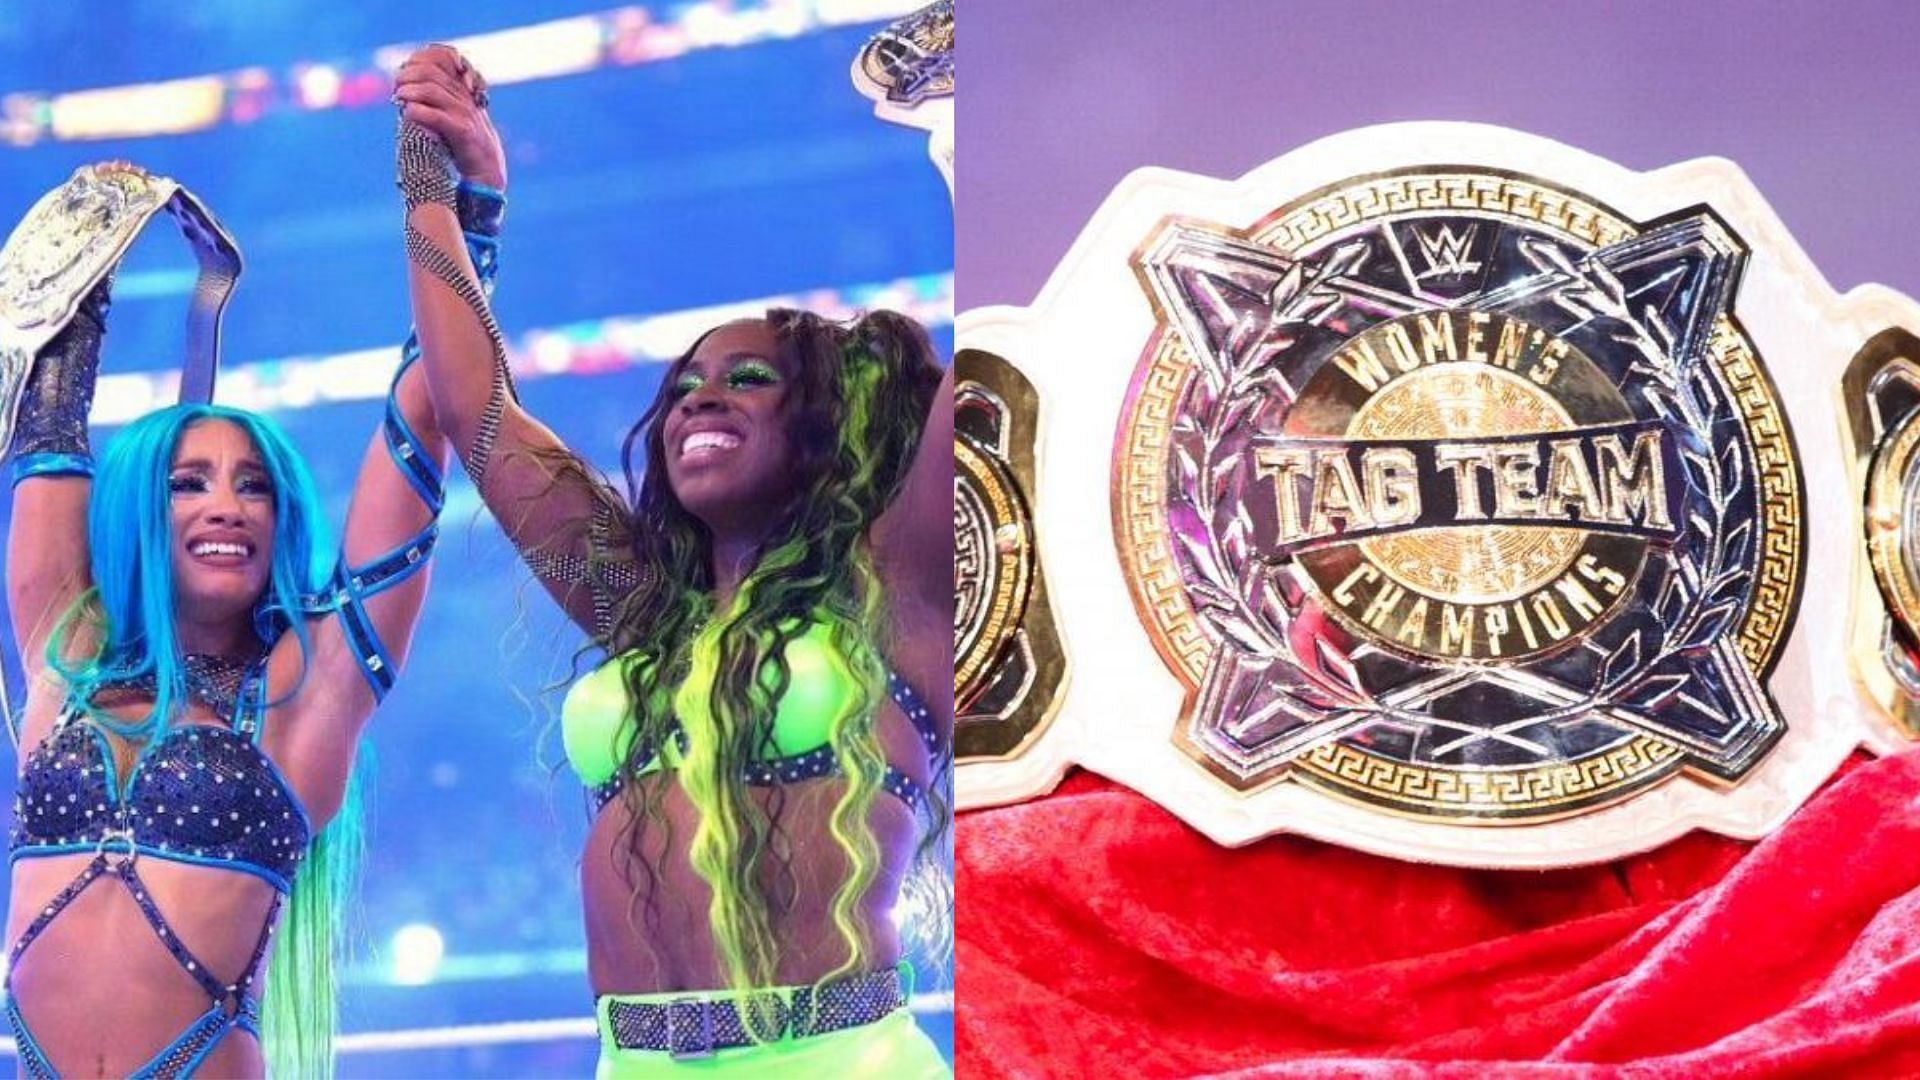 Sasha Banks and Naomi could influence the titles they left